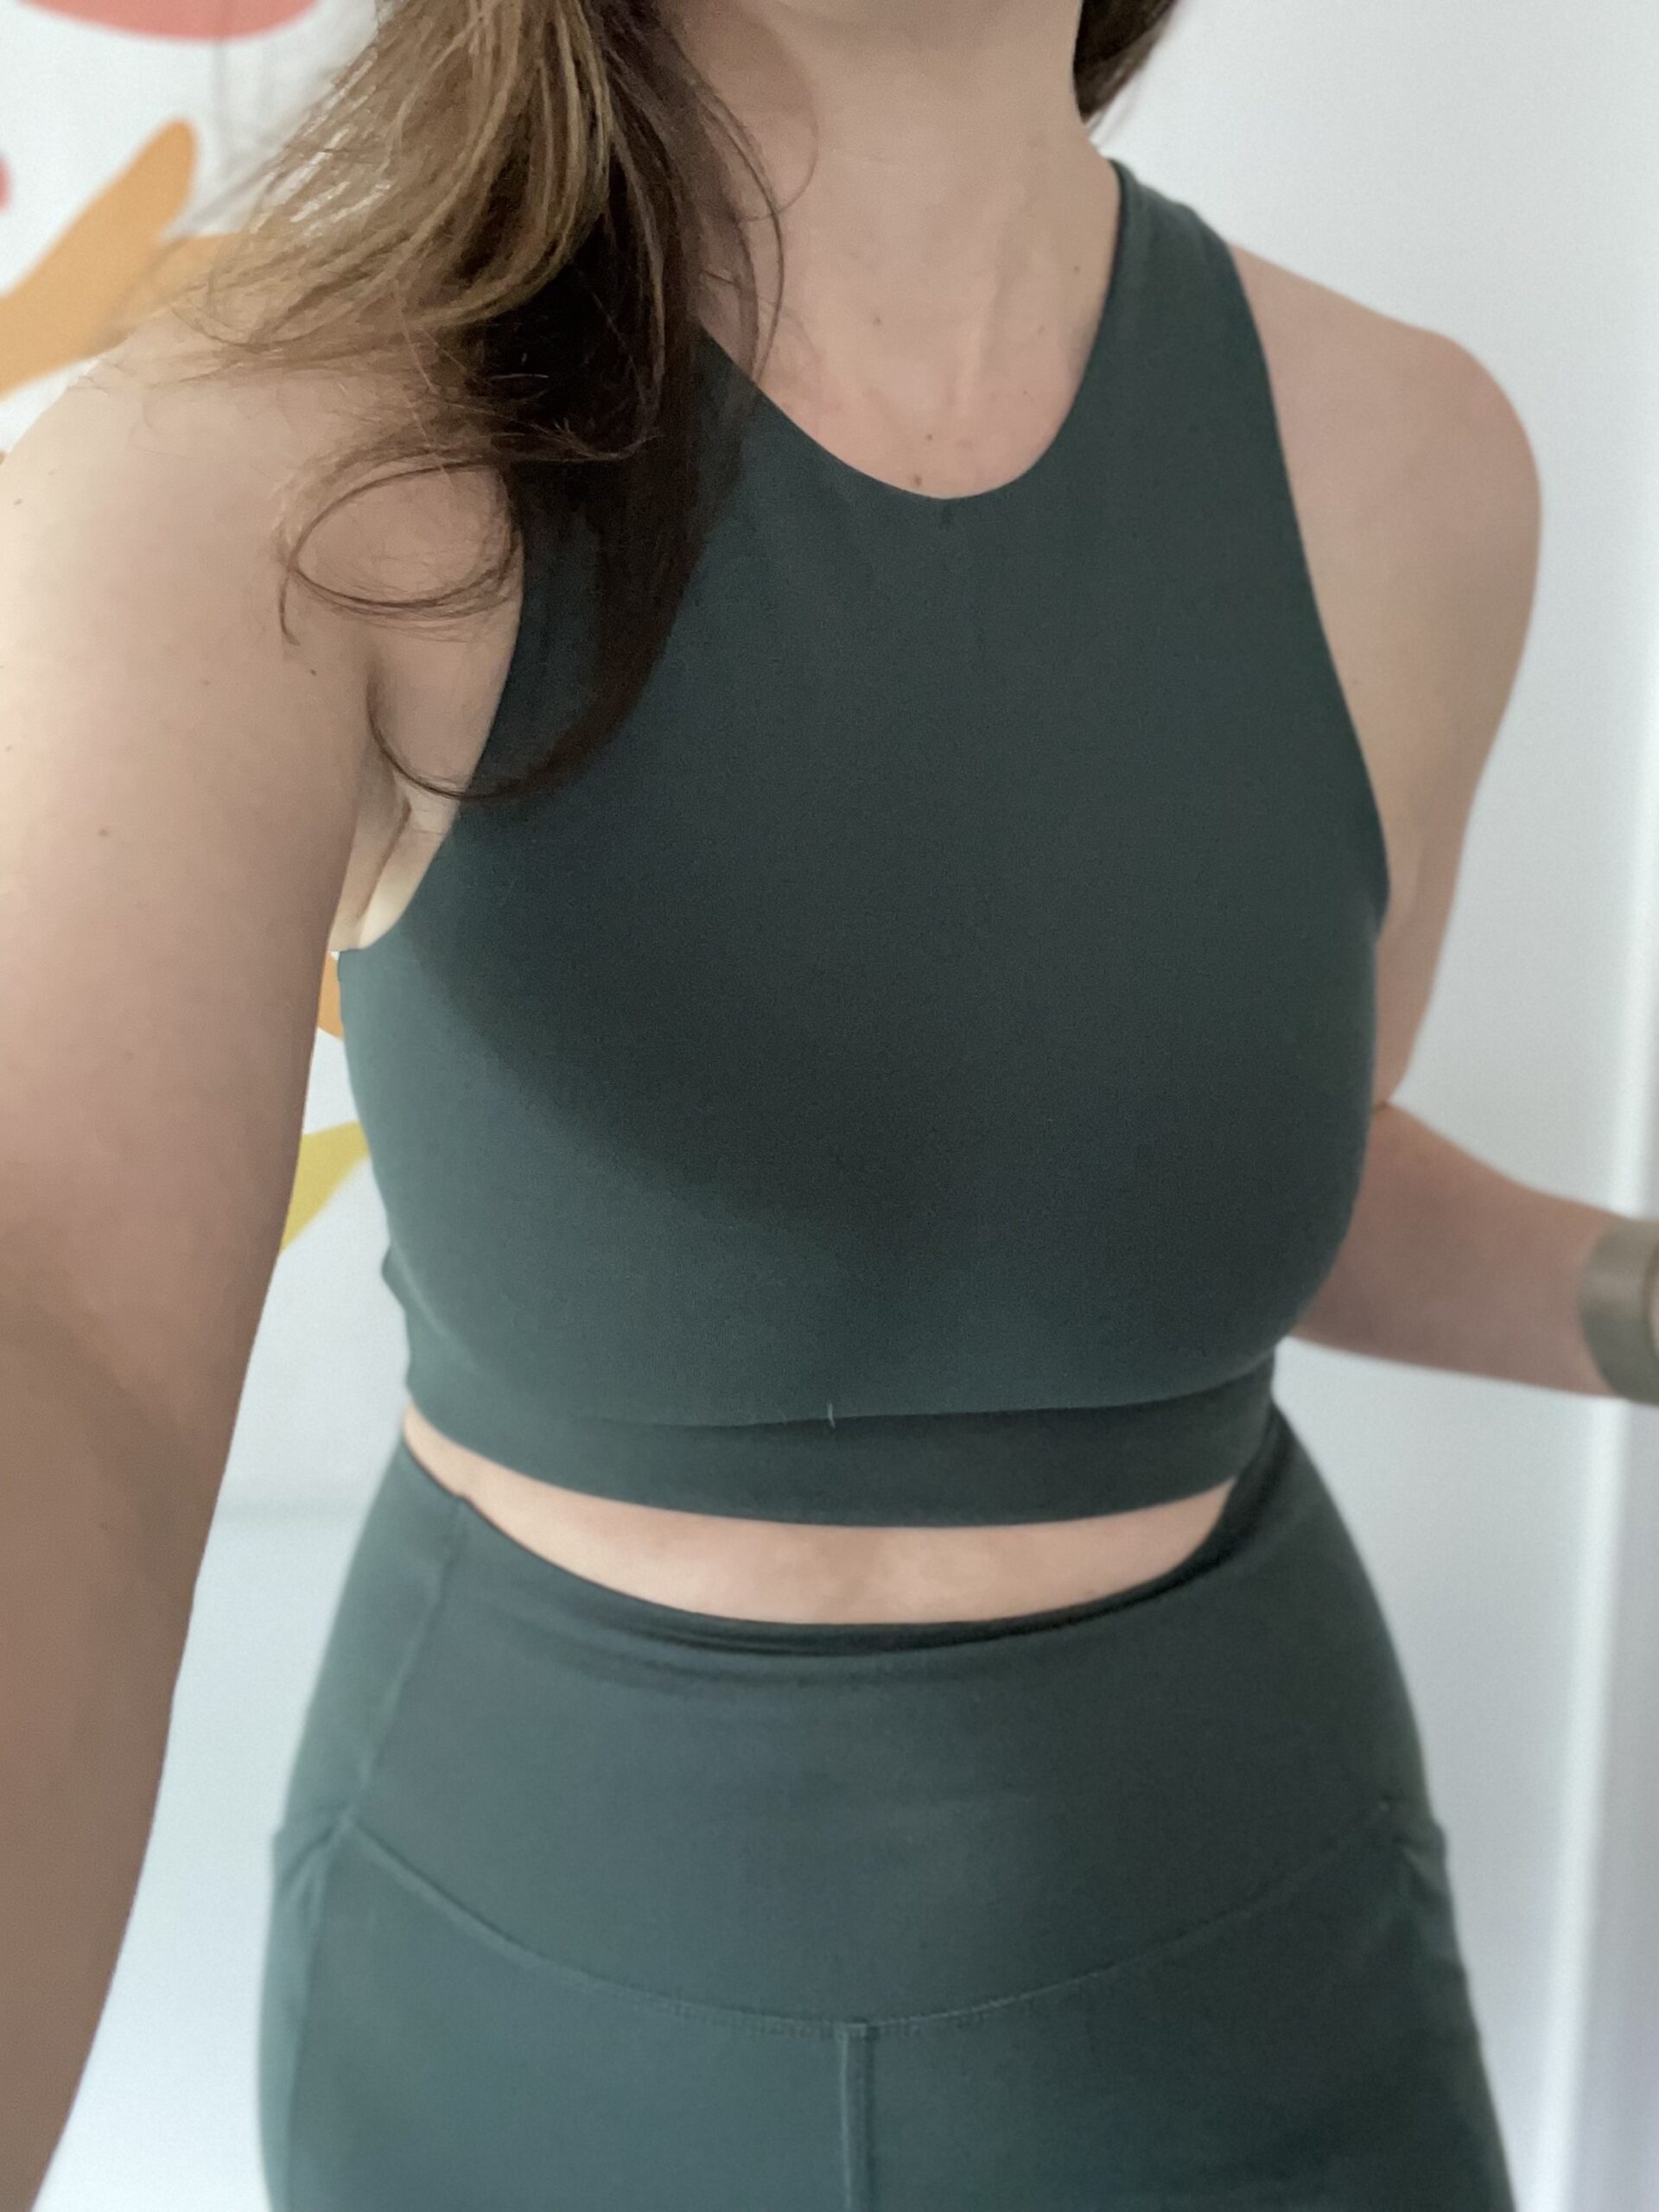 Closeup of the leggings and sports bra while standing.